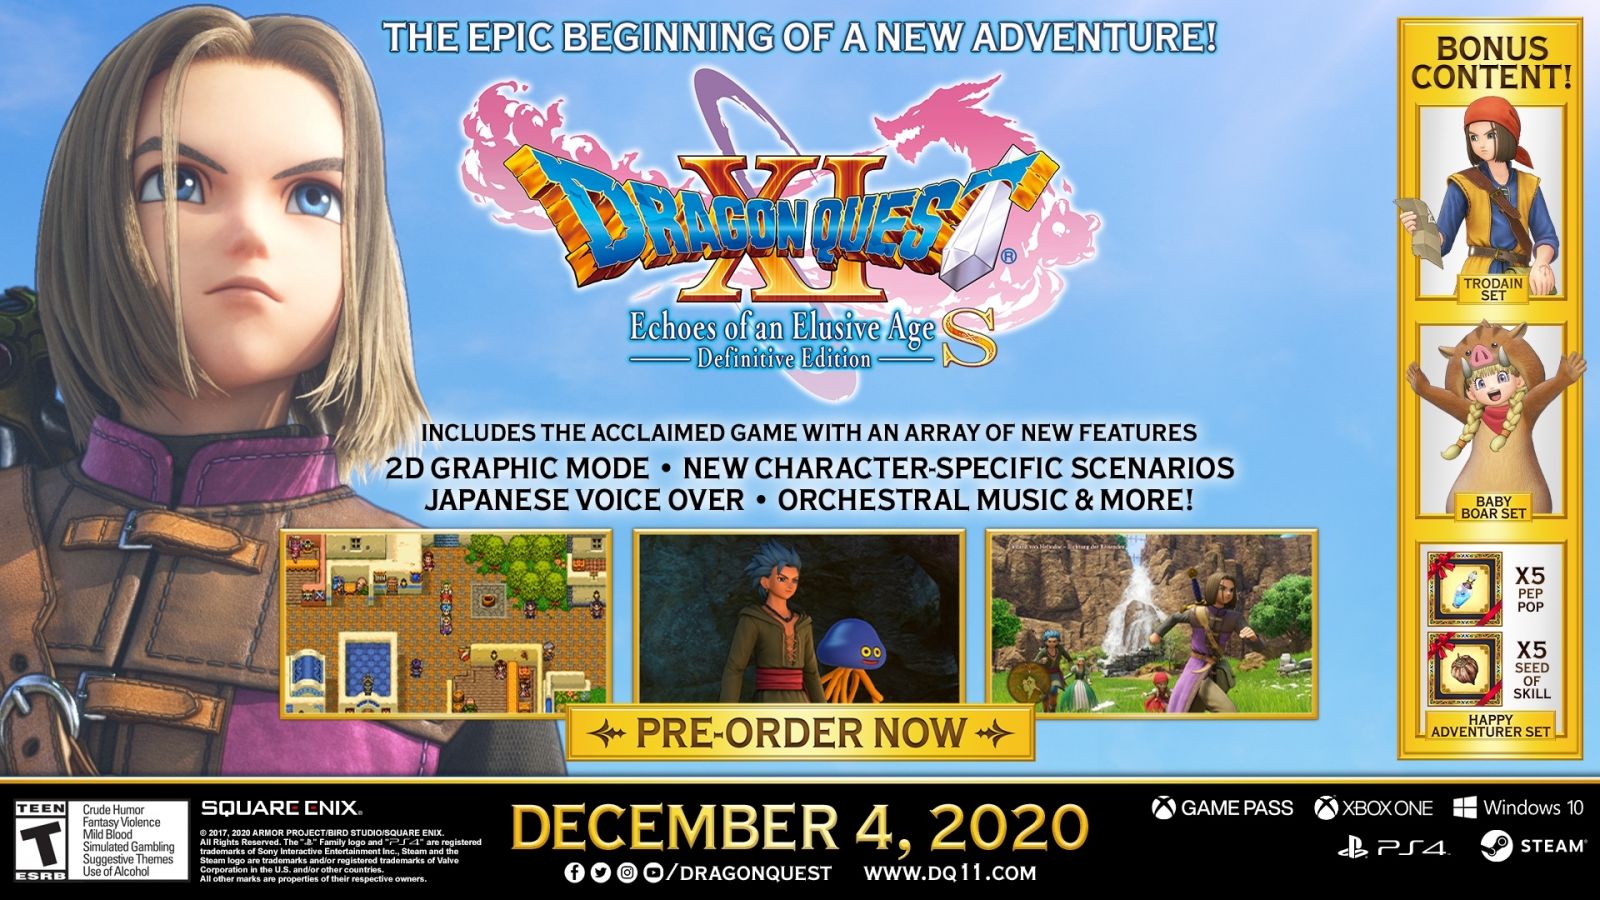 Dragon Quest XI S:  Echoes Of An Elusive Age - Definitive Edition (PS4)